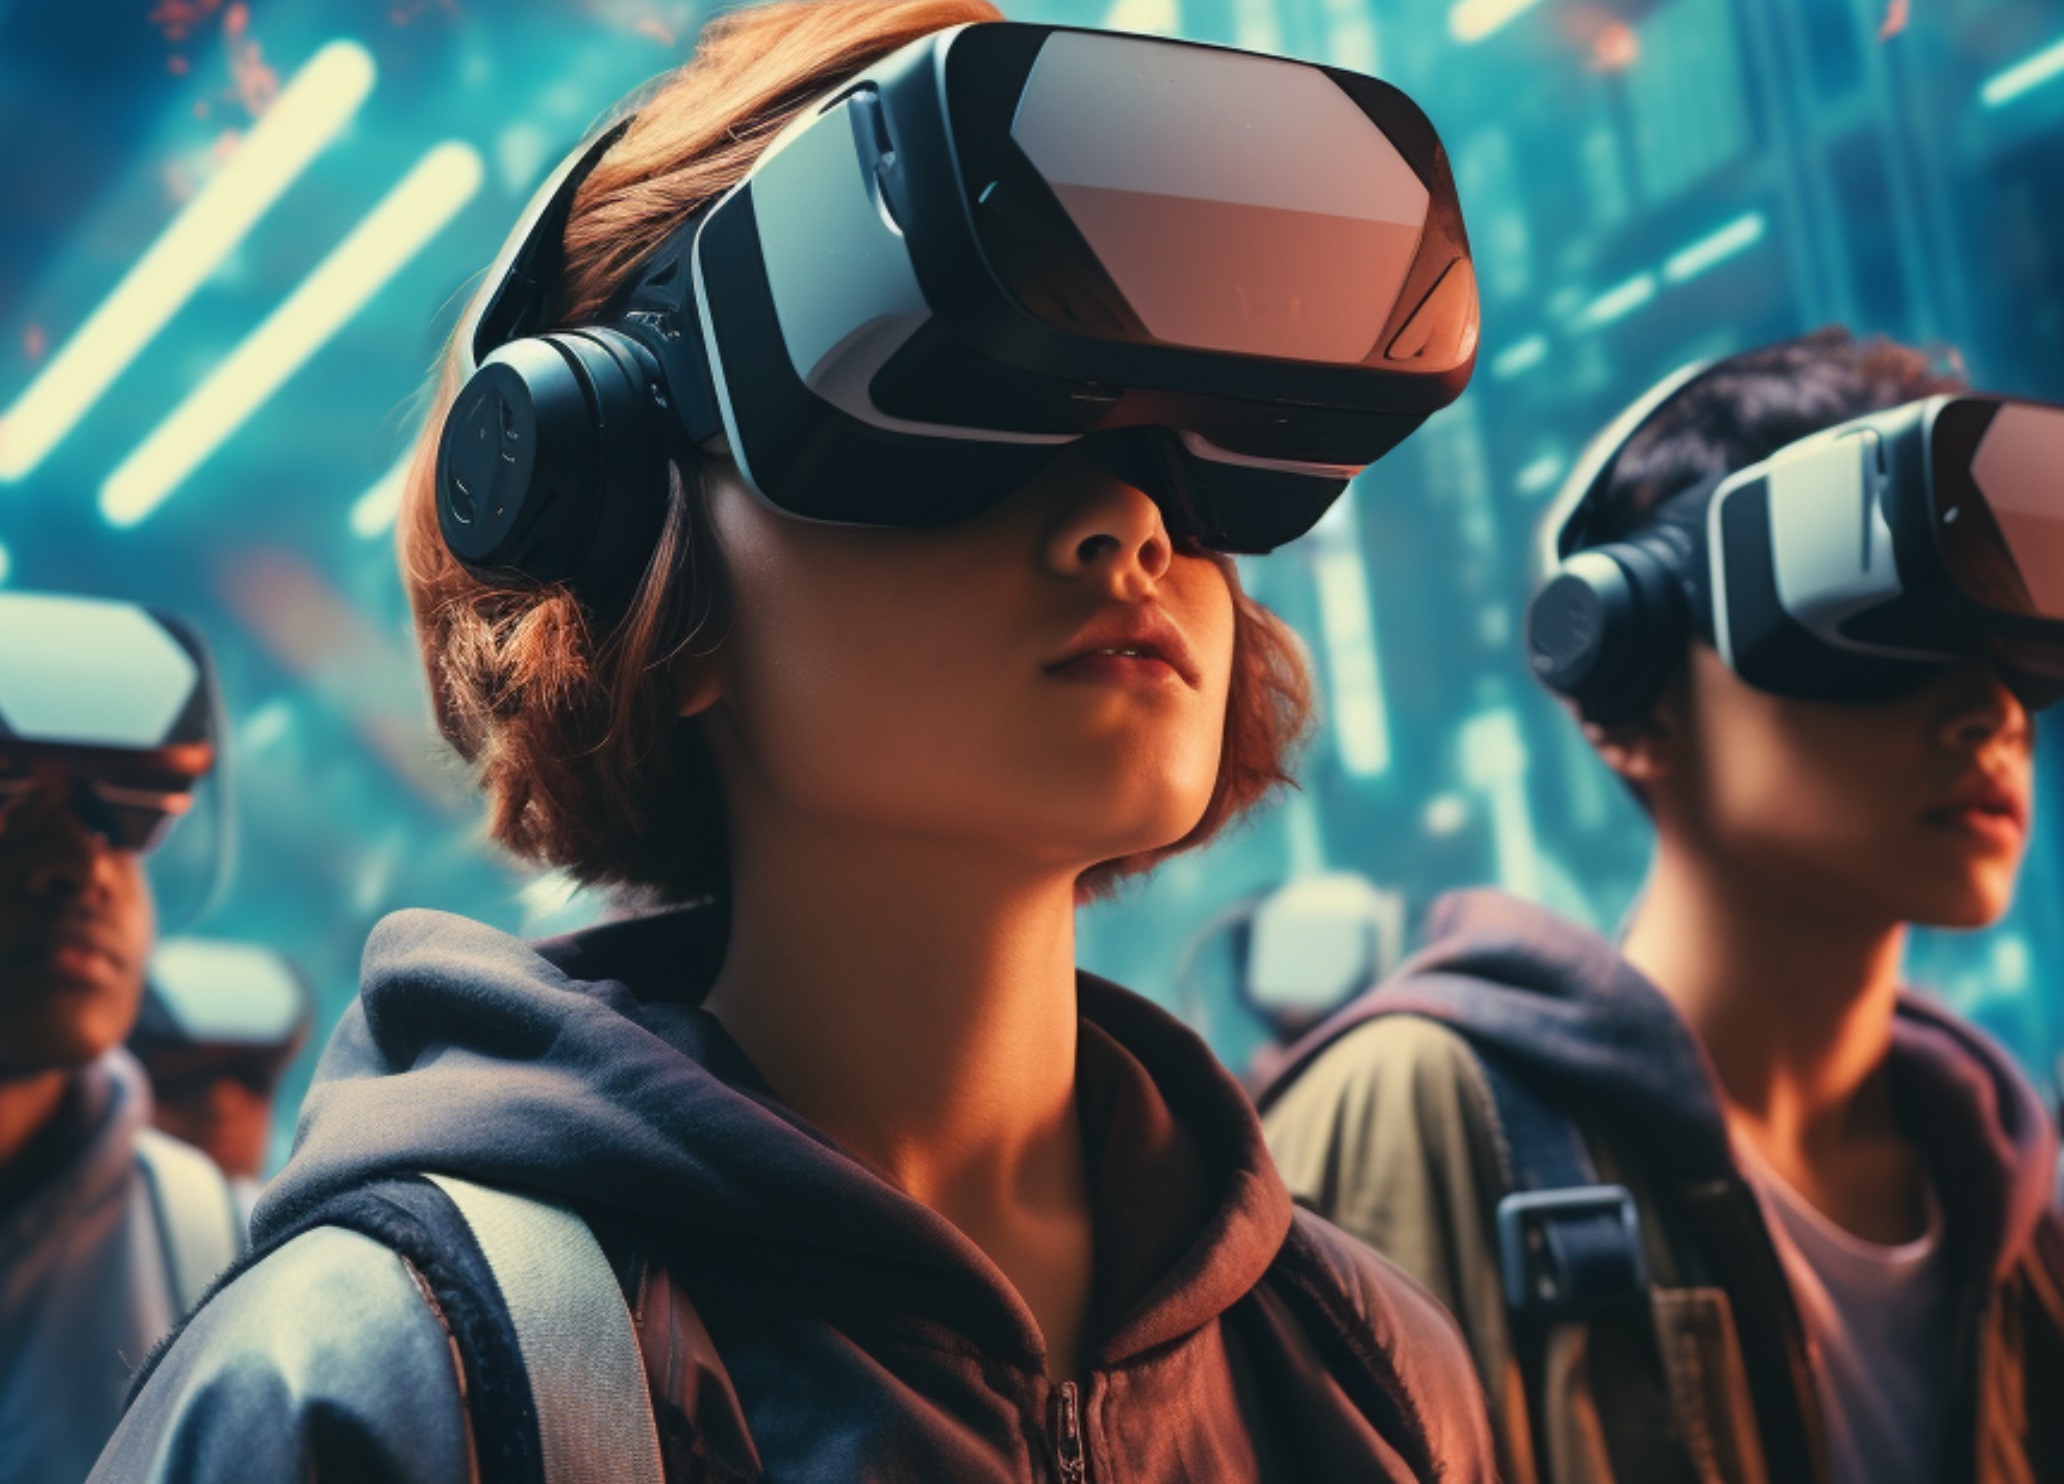 Are VR Classrooms The Stuff of Sci-fi Only?